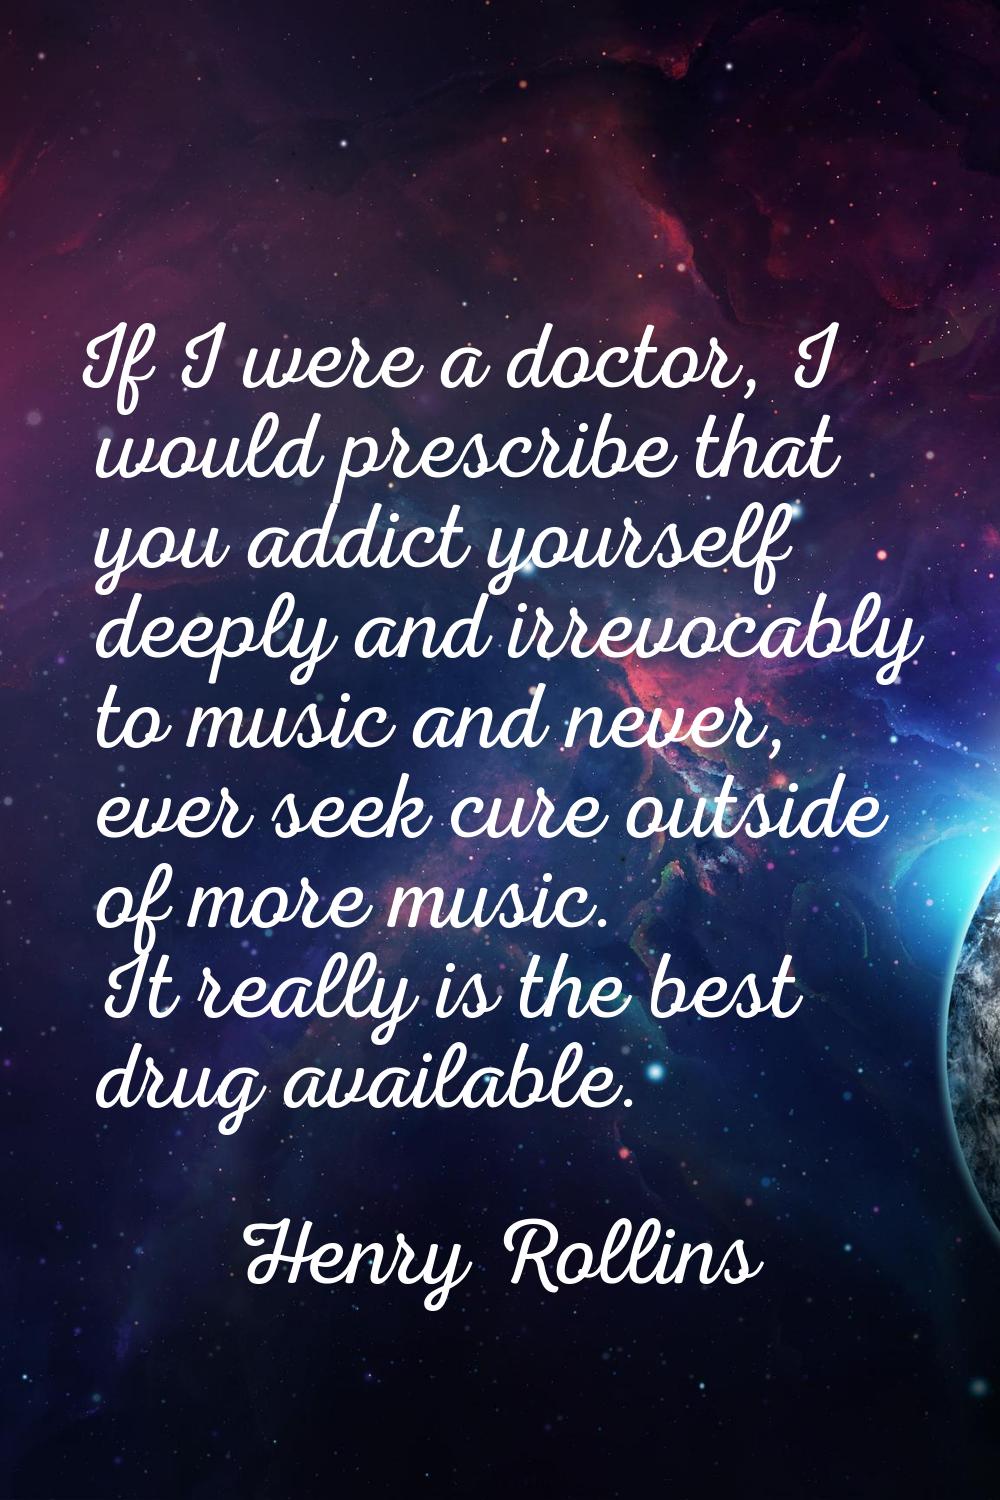 If I were a doctor, I would prescribe that you addict yourself deeply and irrevocably to music and 